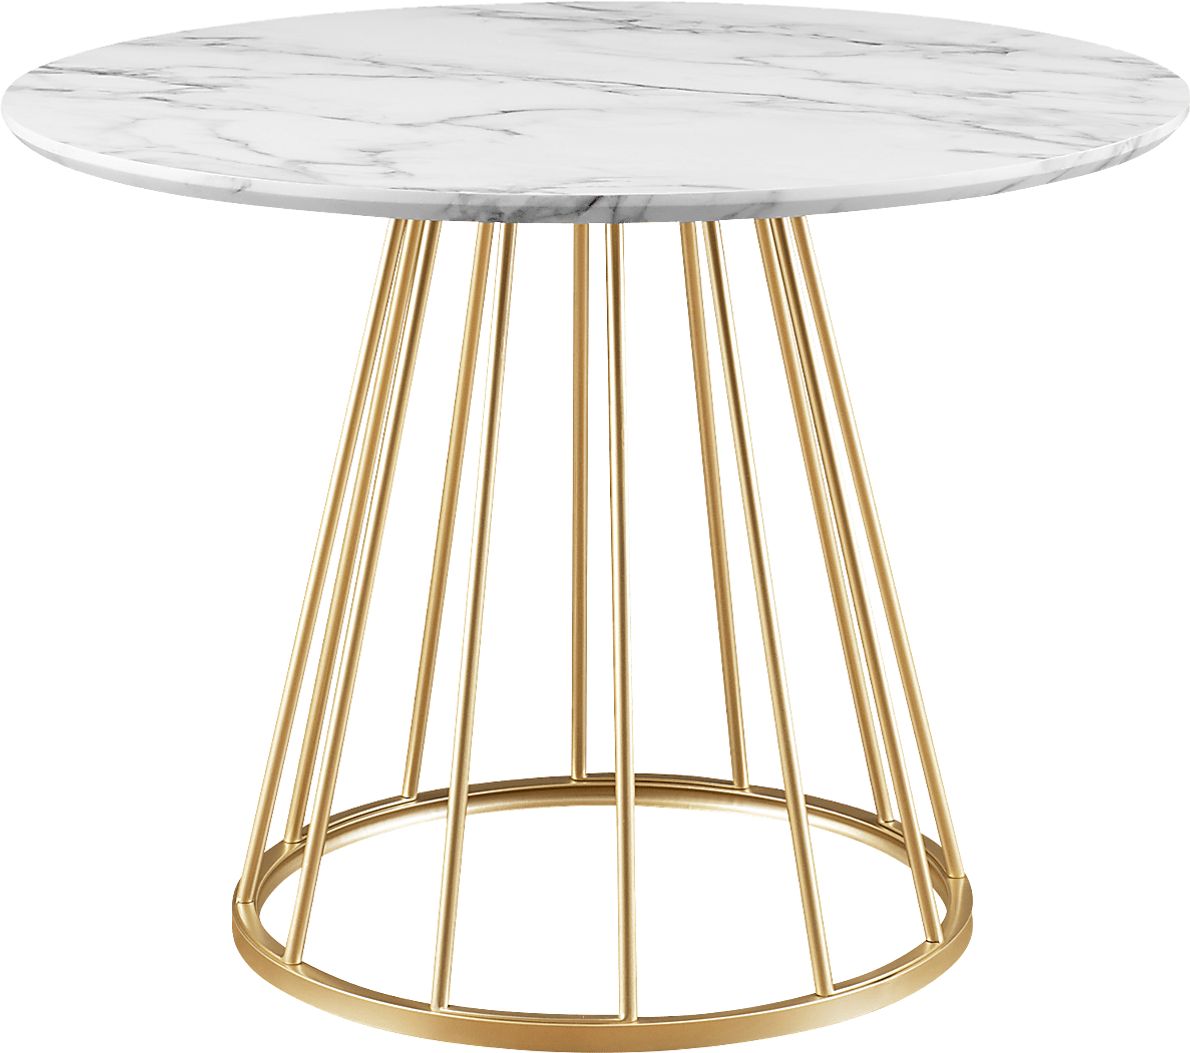 Morgood White Dining Table